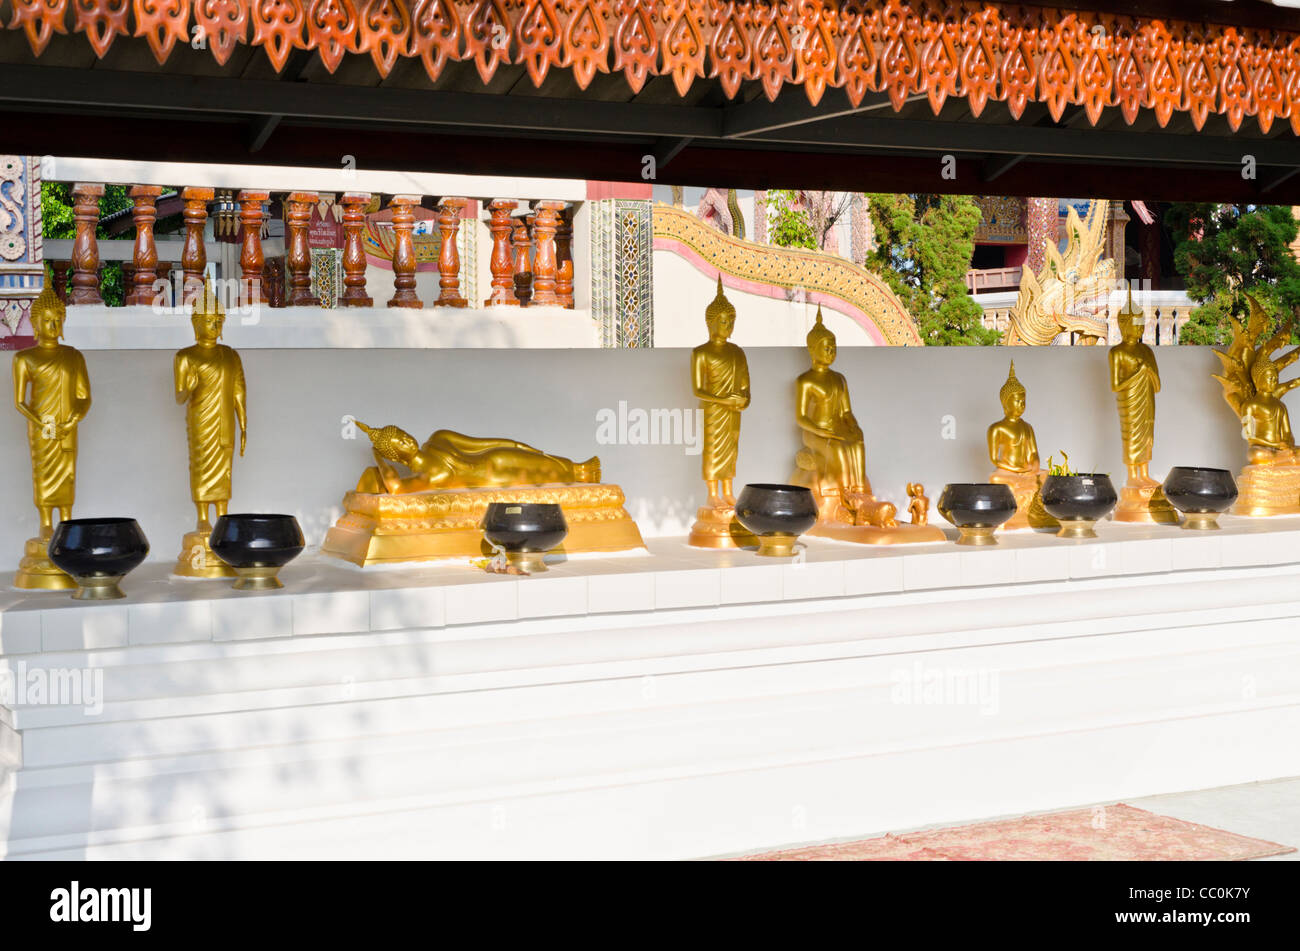 Several small gold Buddha statues on white mantle with black bowls in front at Buddhist temple in northern Thailand Stock Photo